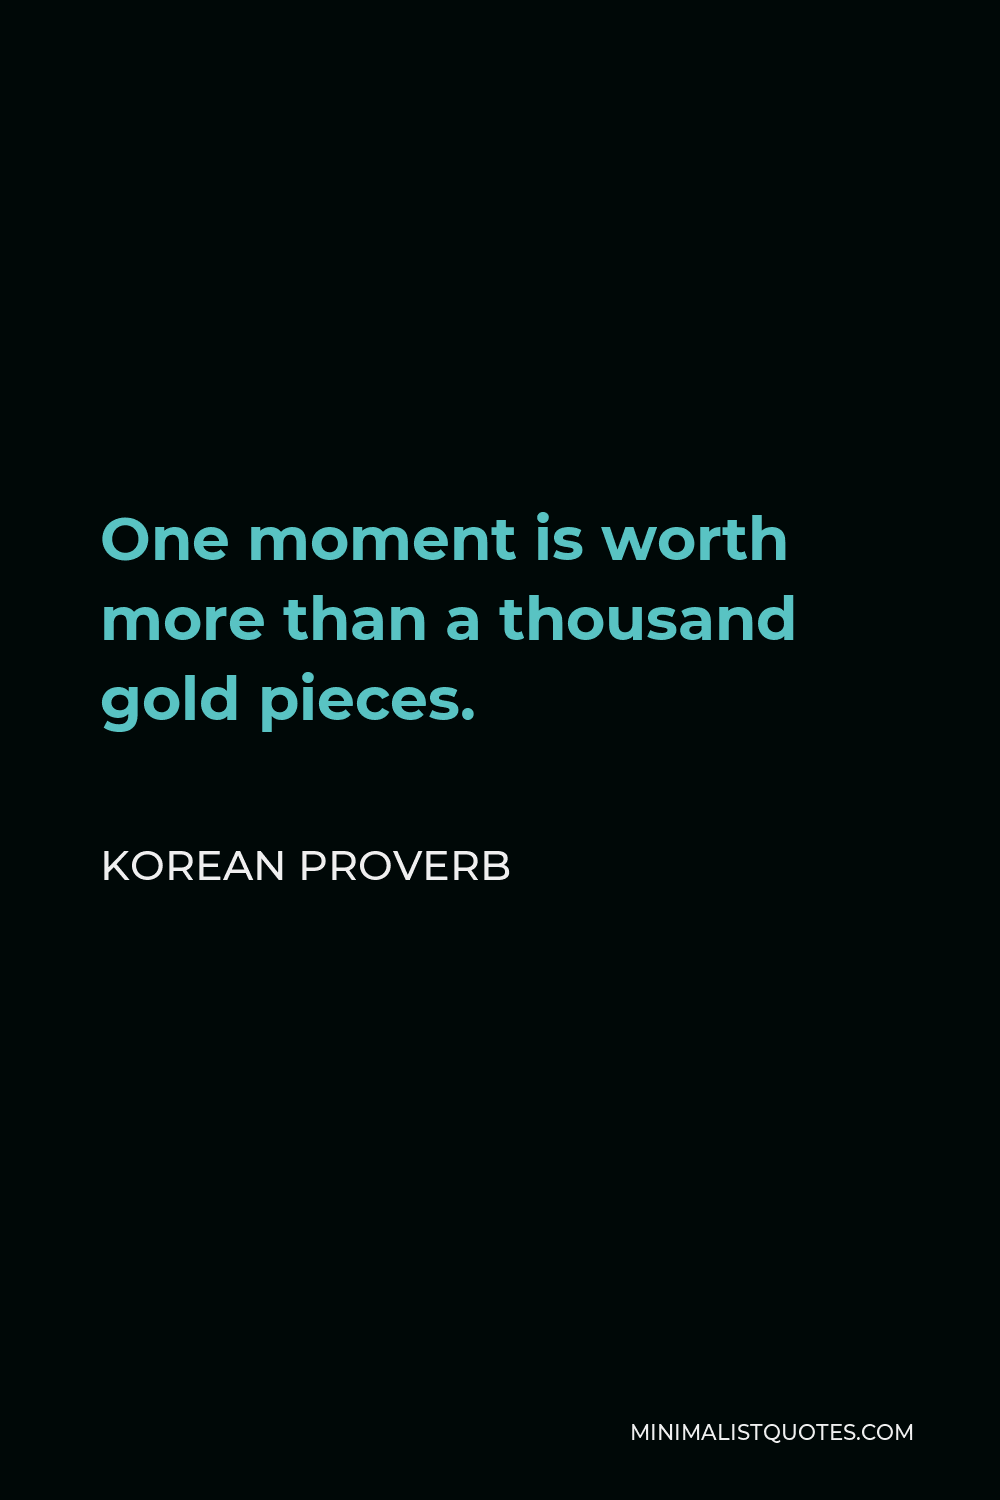 Korean Proverb Quote - One moment is worth more than a thousand gold pieces.